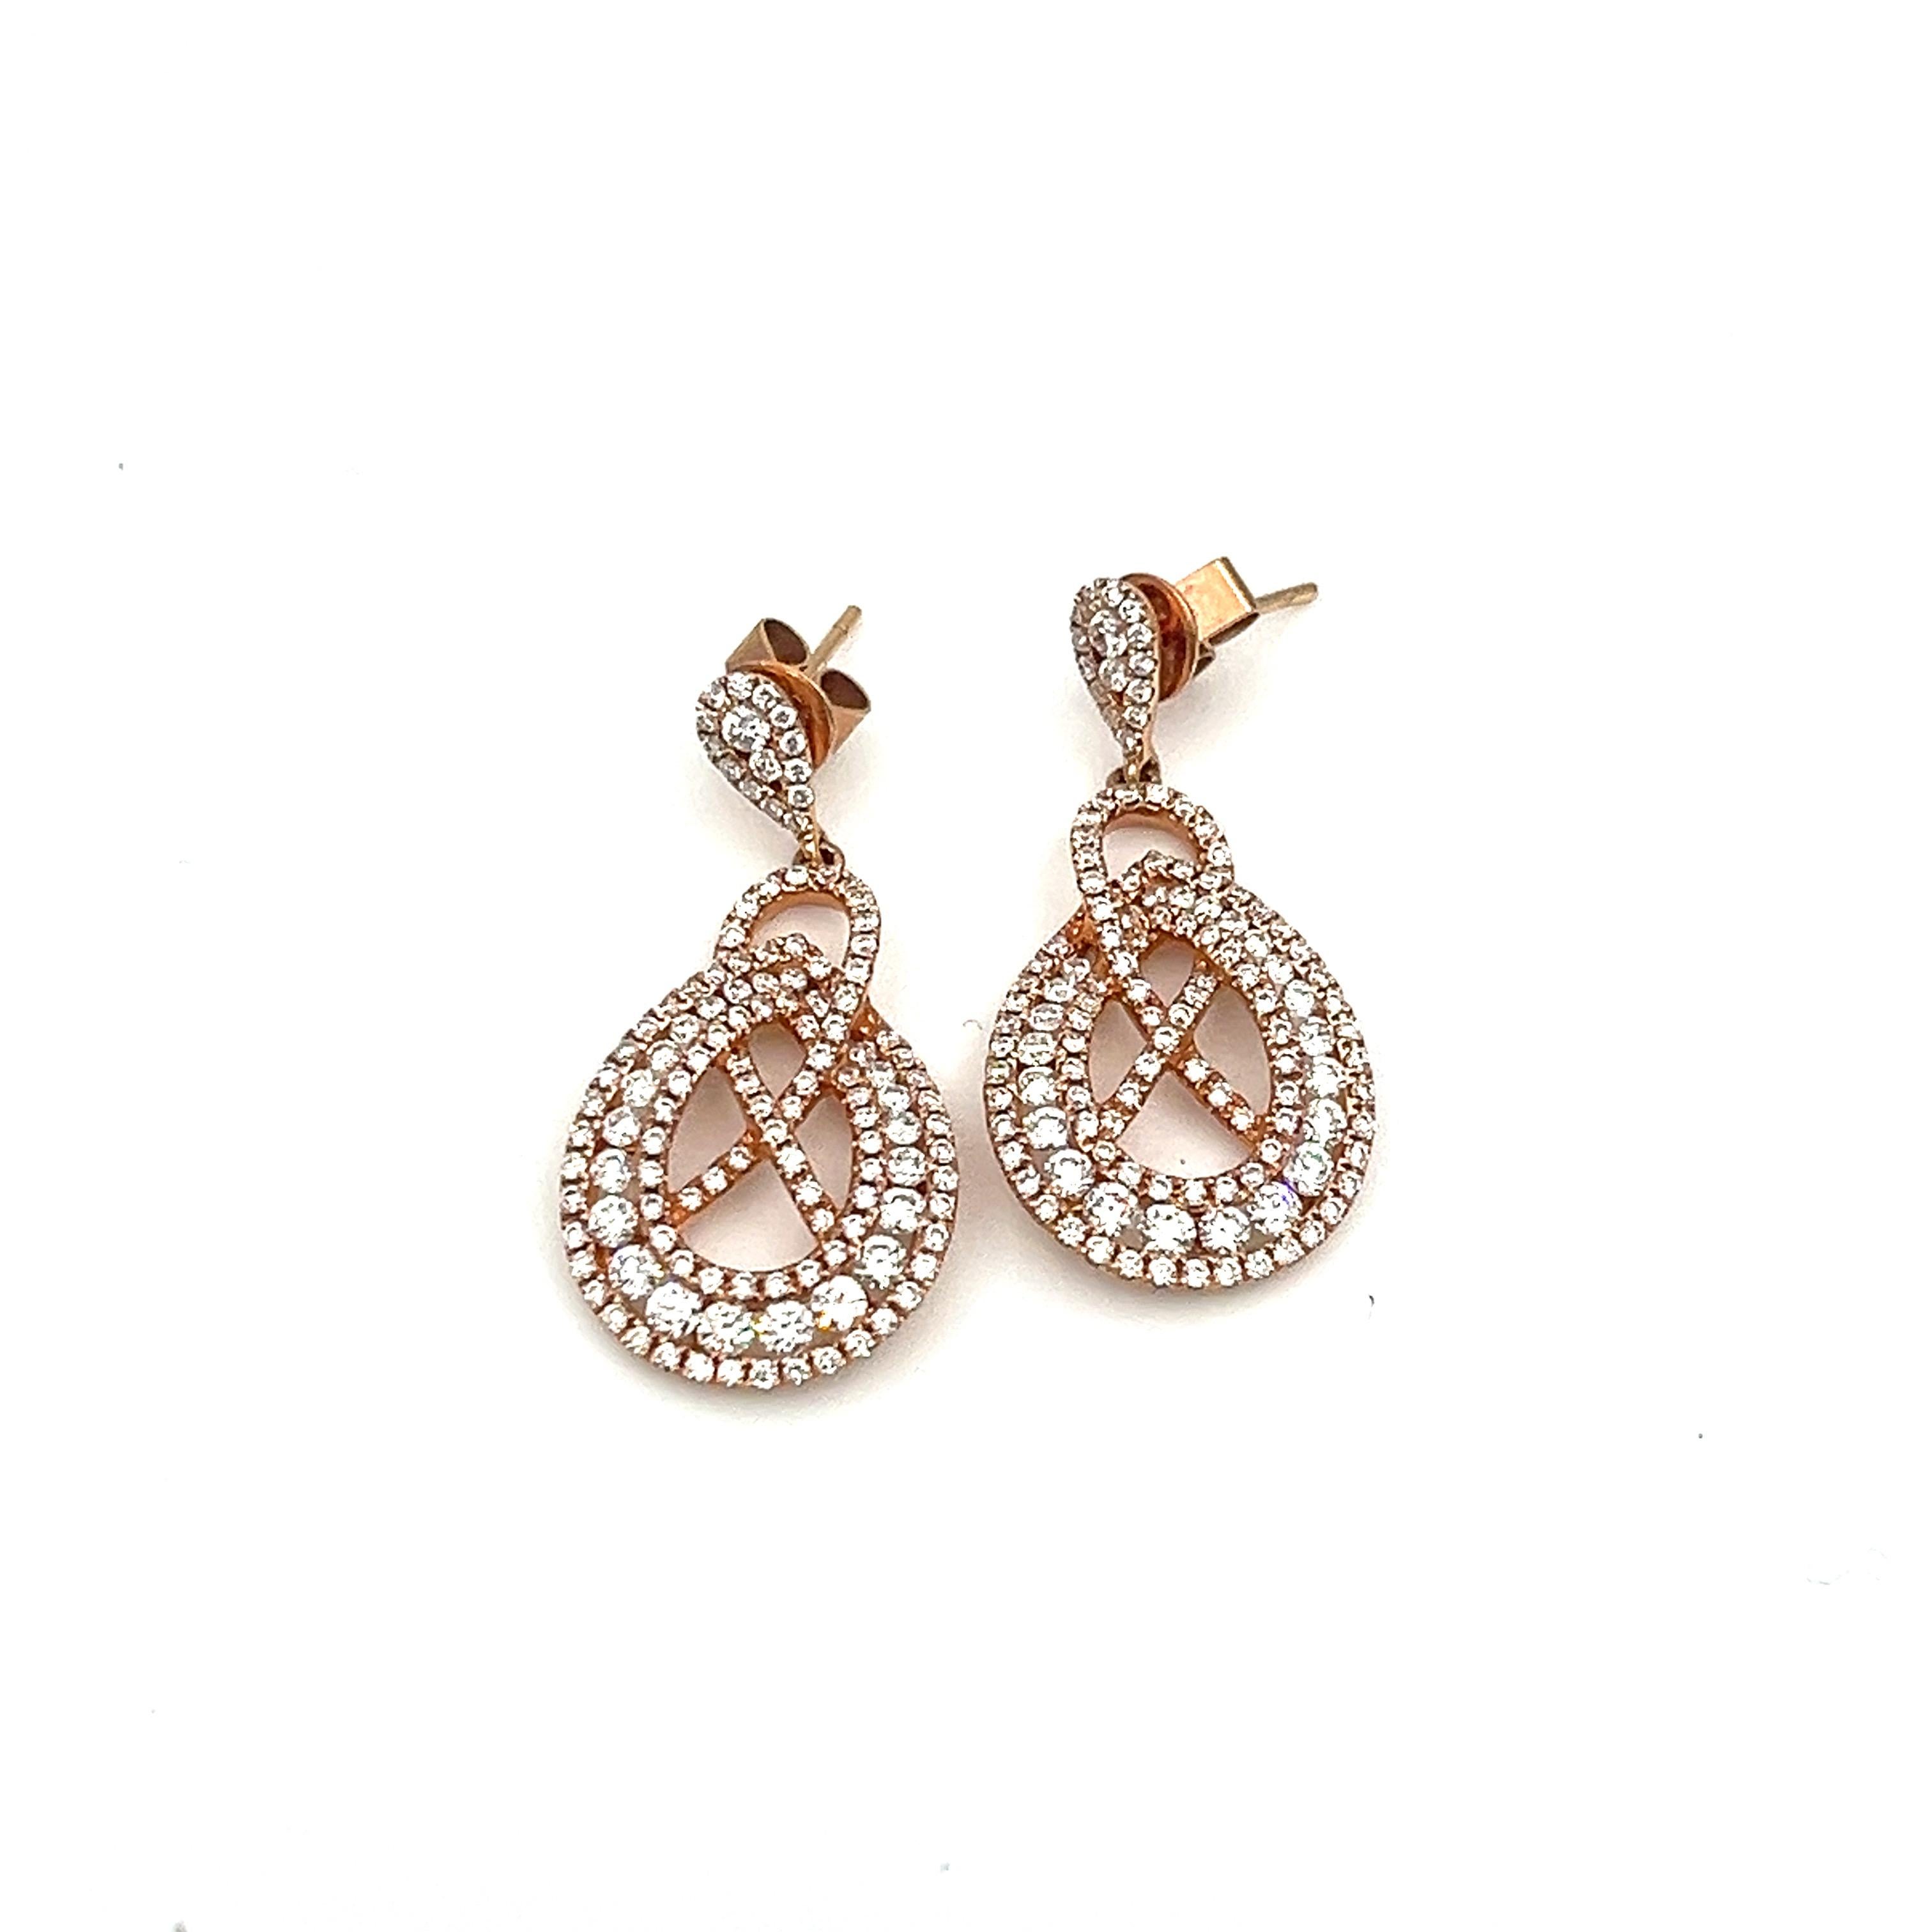 These stunning 18k rose gold dangle earrings with 256 diamonds are sure to turn heads. The diamonds are graded E/F with a clarity of VS1/VS2. A great addition to any wardrobe. 